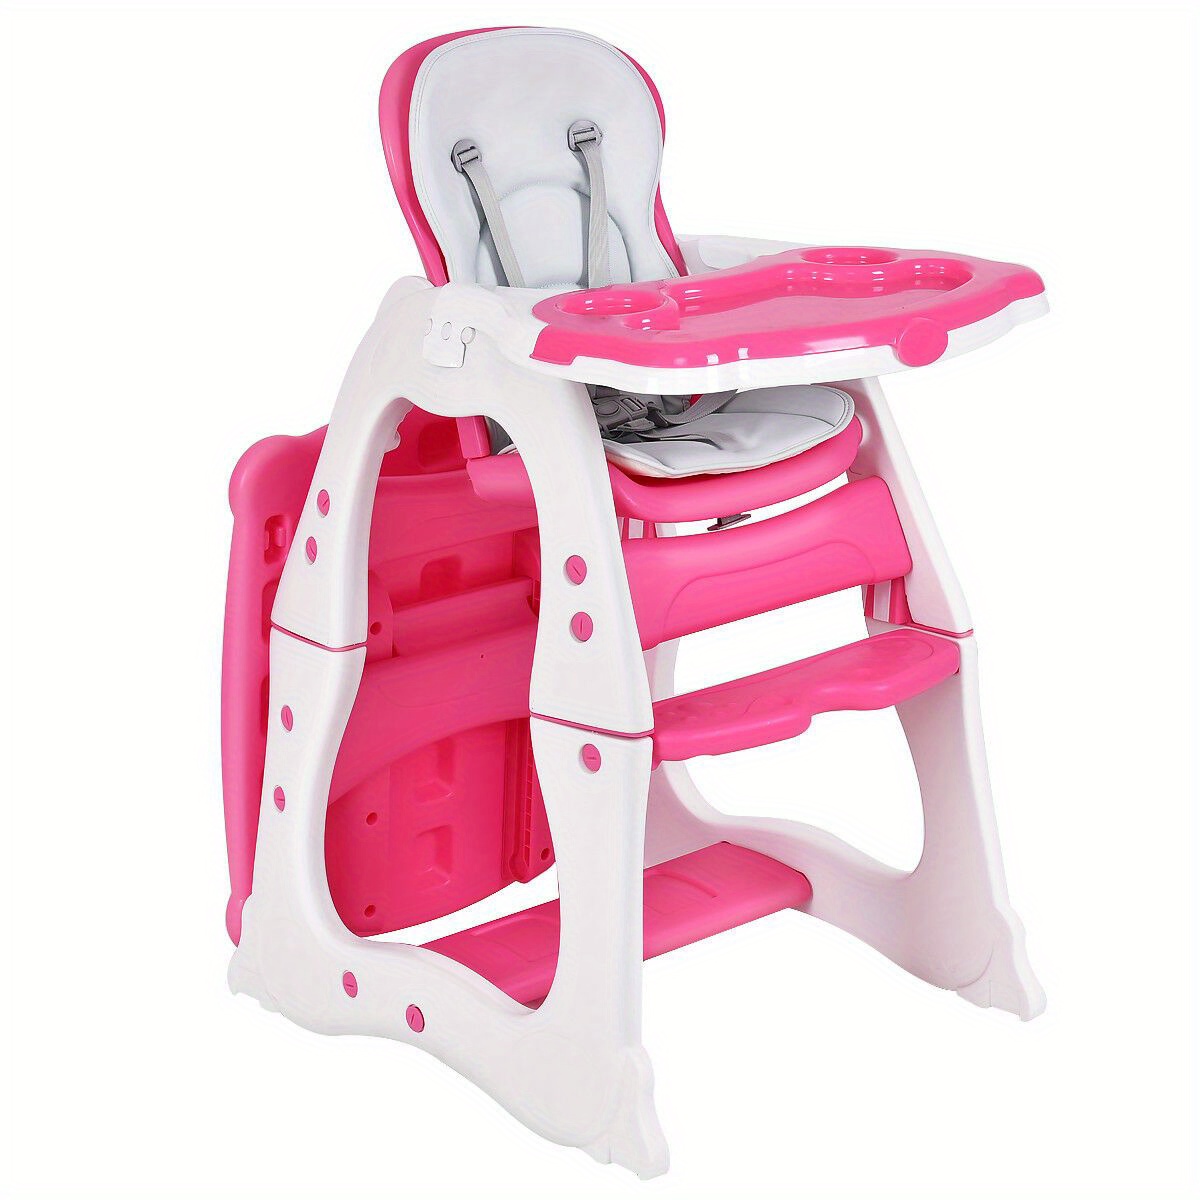 

Multigot 3 In 1 Baby High Chair Play Table Seat Booster Toddler Feeding Tray